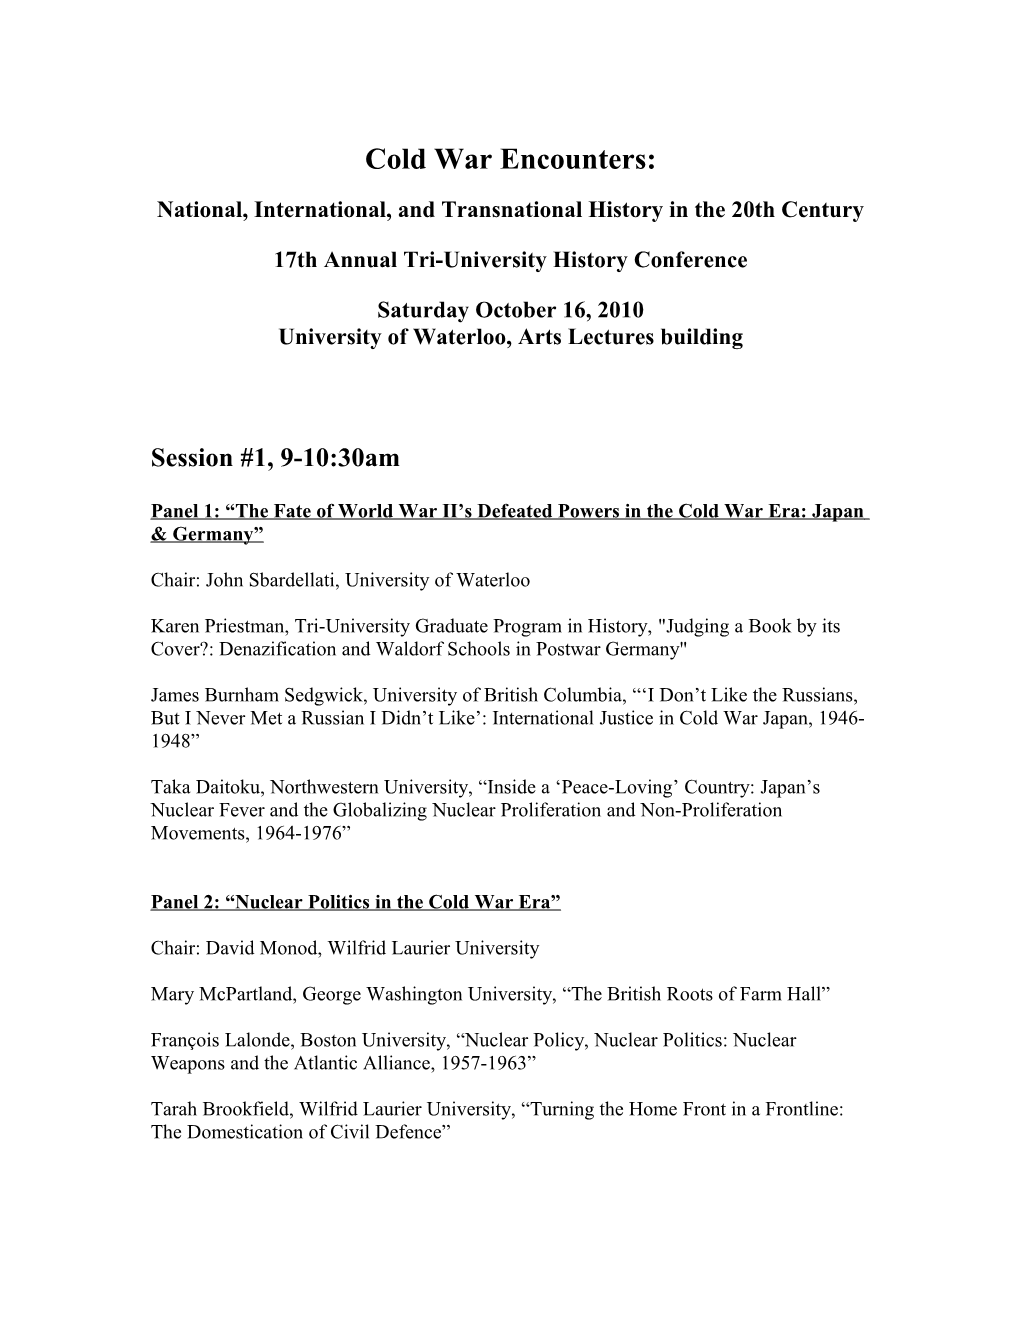 Cold War Encounters Conference